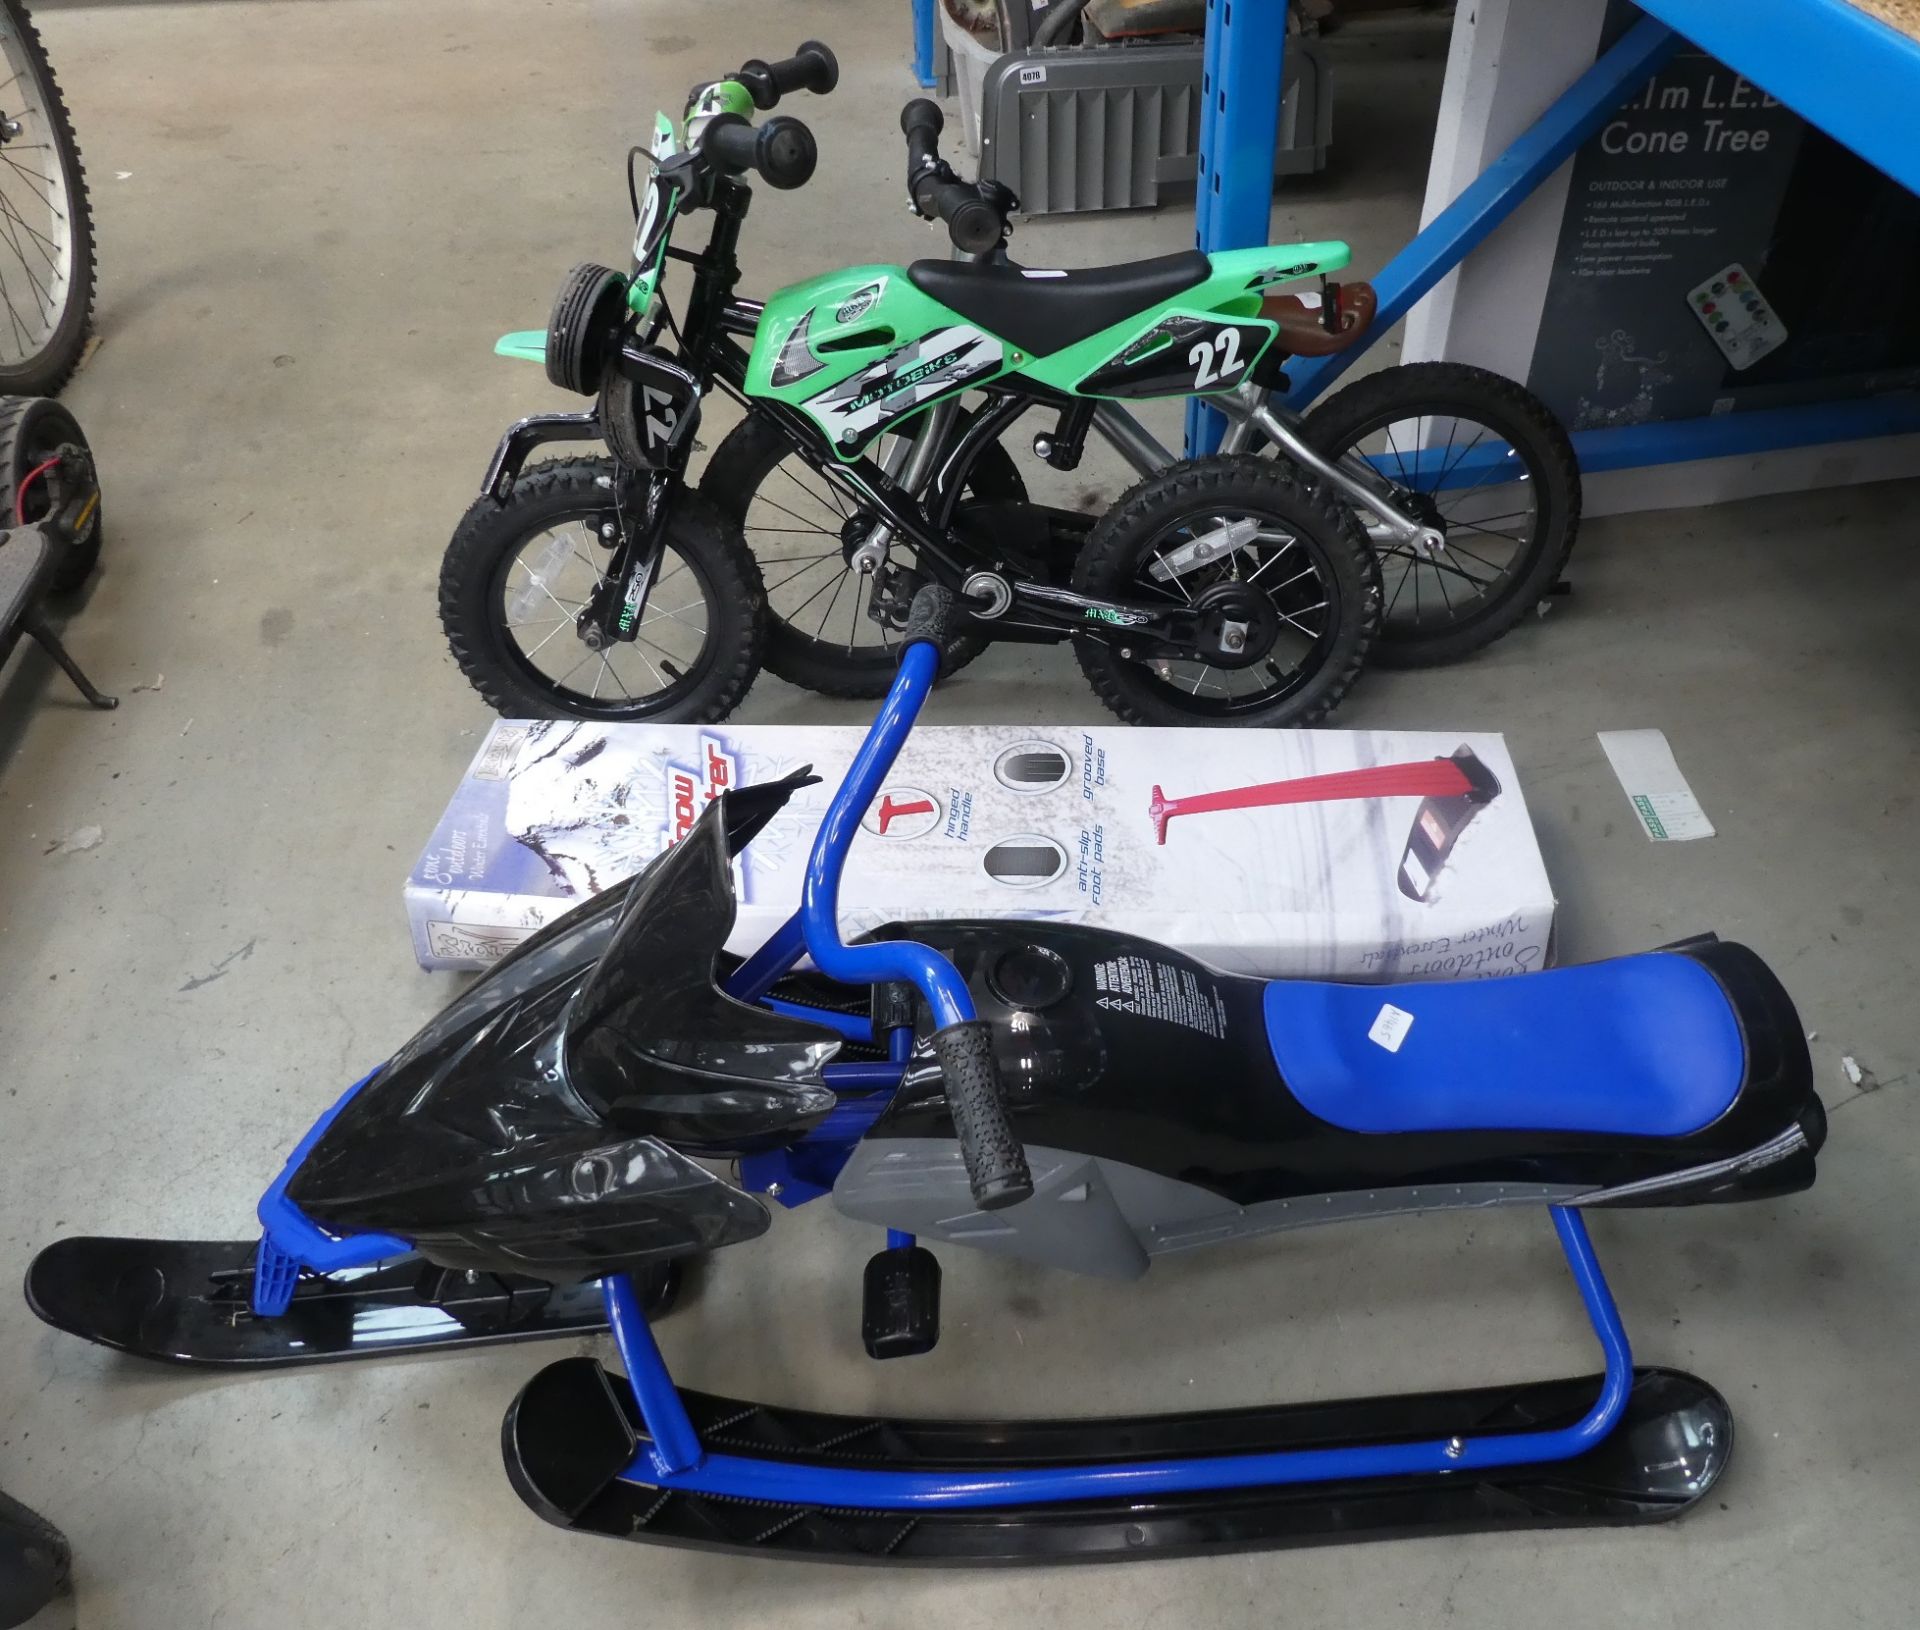 Boxed snow scooter, plastic snow buggy and two small children's bikes